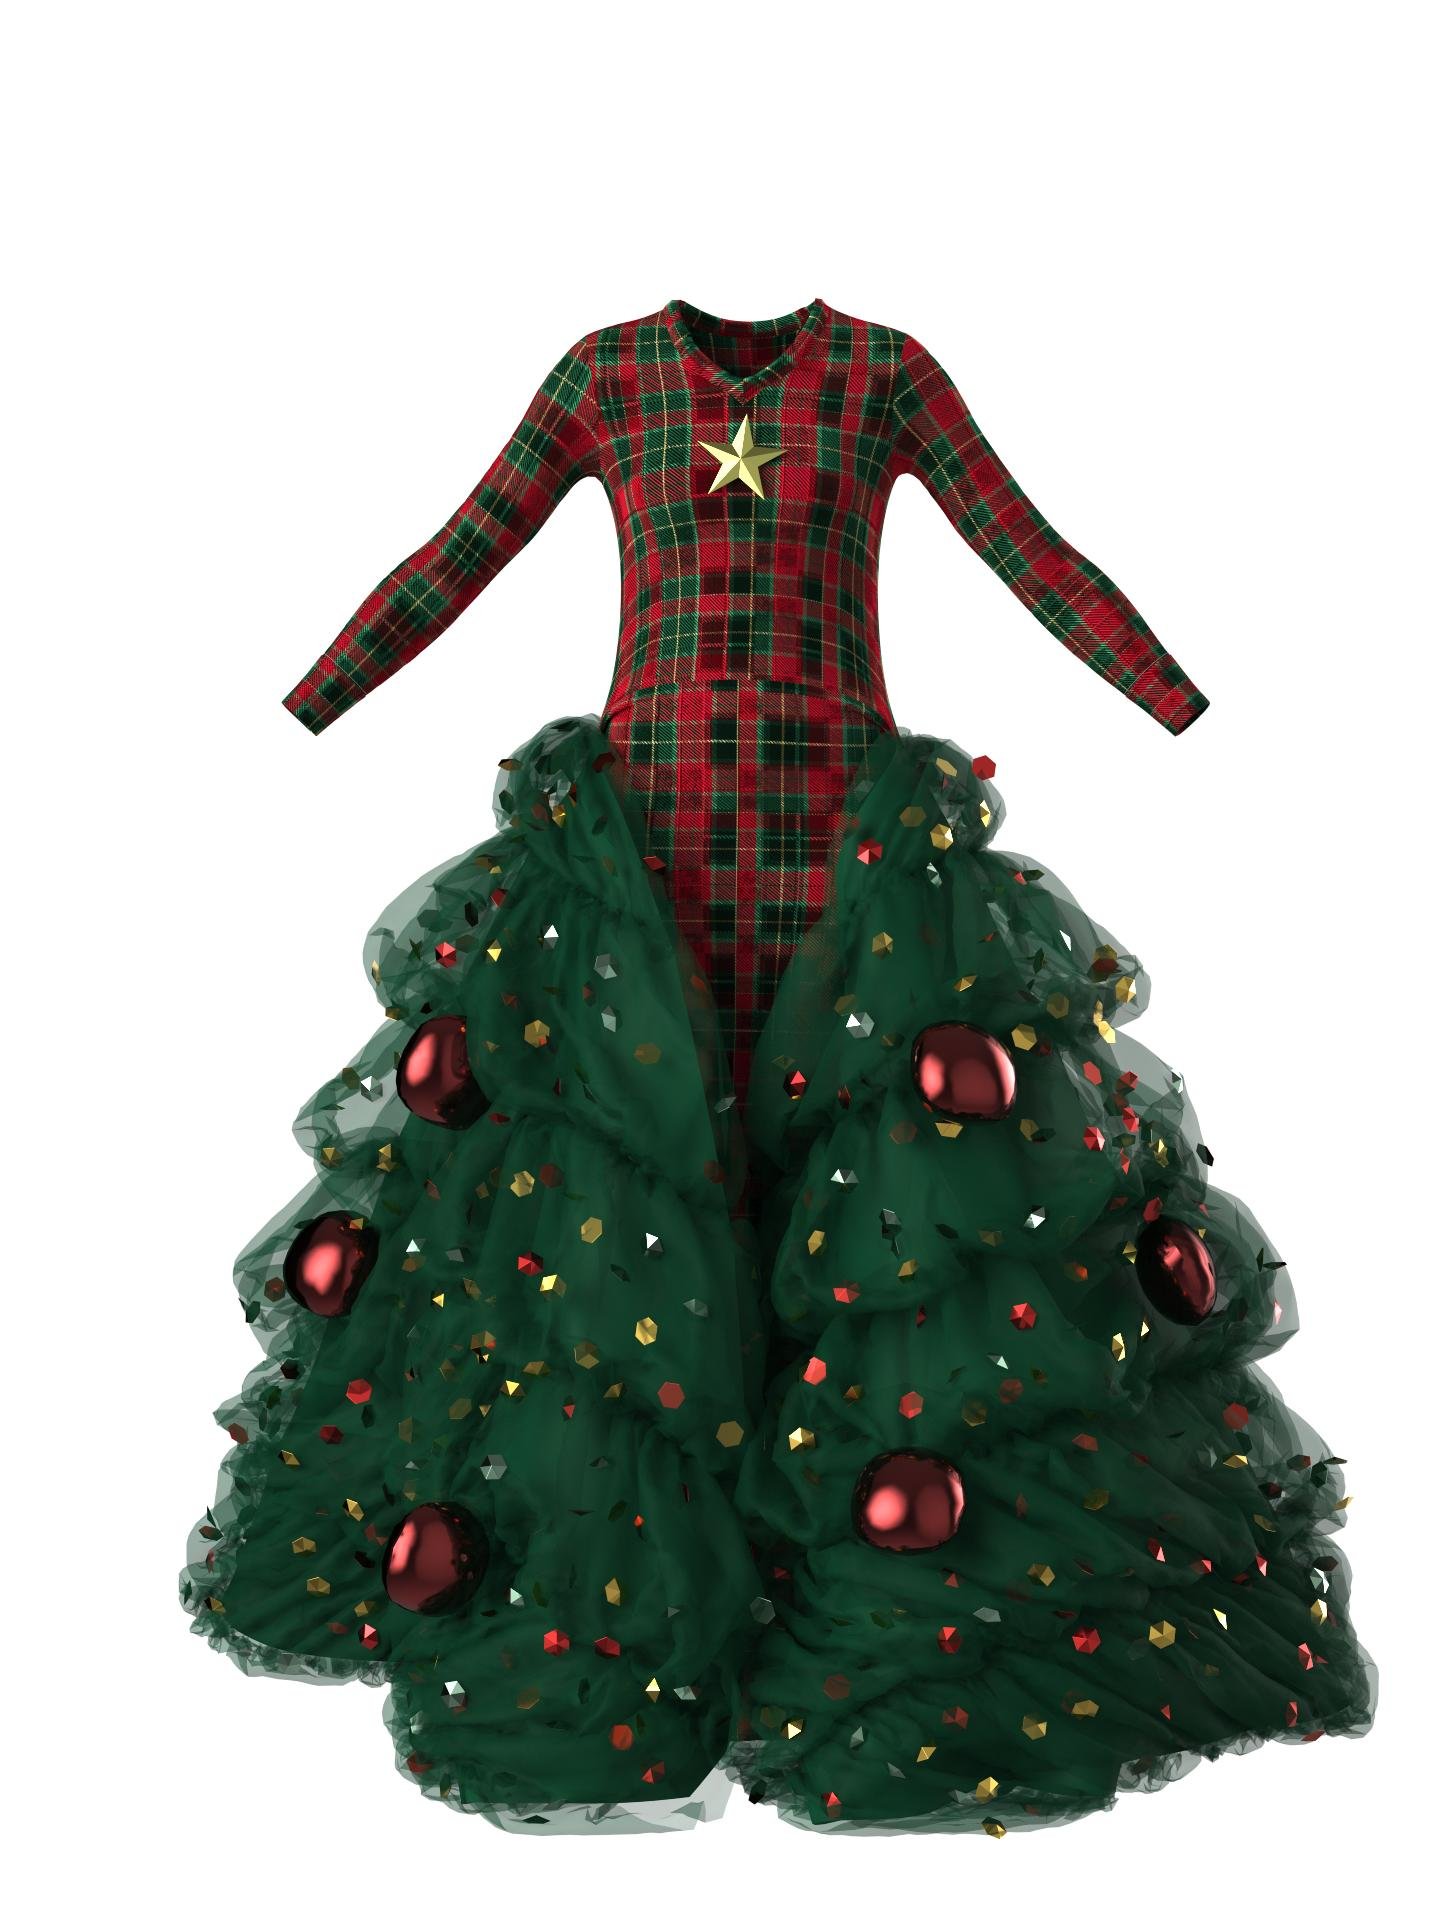 Christmas Gown-II-I by SARA HASANPOUR